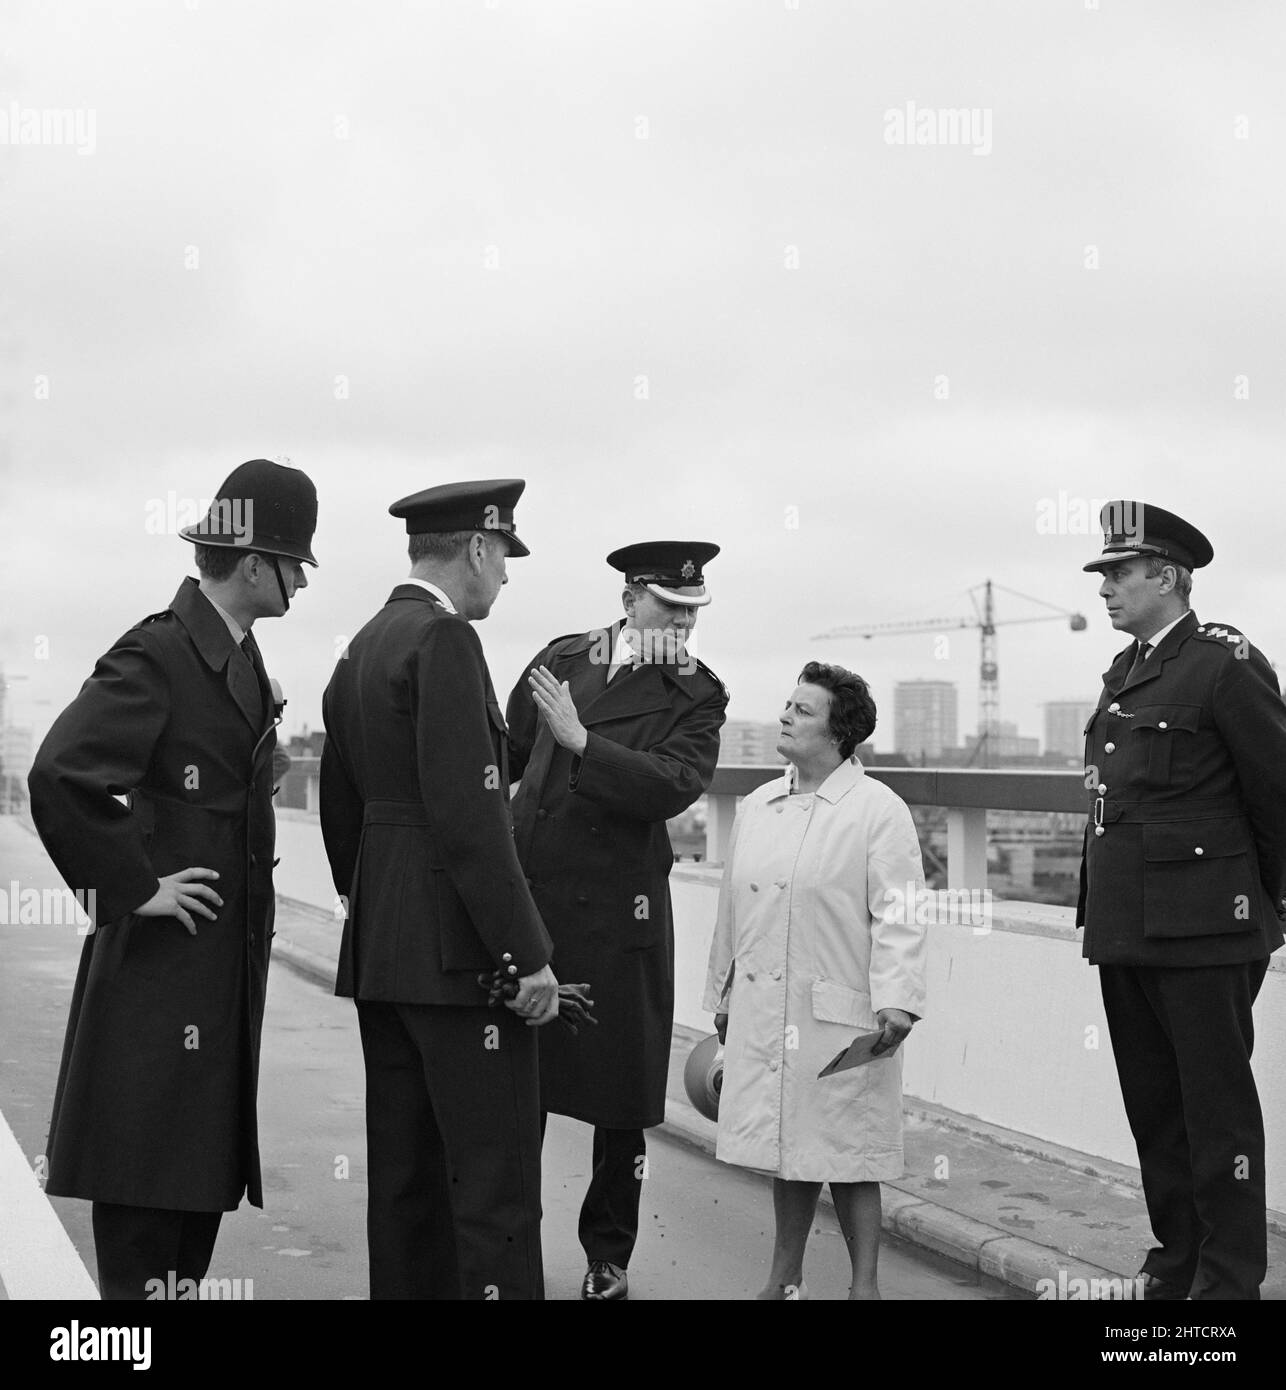 Westway Flyover, A40, Paddington, City of Westminster, London, 28/07/1970. Four police officers talking with the leader of the demonstrators protesting against the opening of the Westway Flyover. Acklam Road was the focus of protests against the Westway by local residents. Houses along one side of the street had been demolished to make way for the flyover and at a reception held earlier that day at the Lord&#x2019;s Tavern, George Clark, leader of the residents&#x2019; social rights committee, had presented their objections to the Minister of Transport and representatives from the Greater Lond Stock Photo